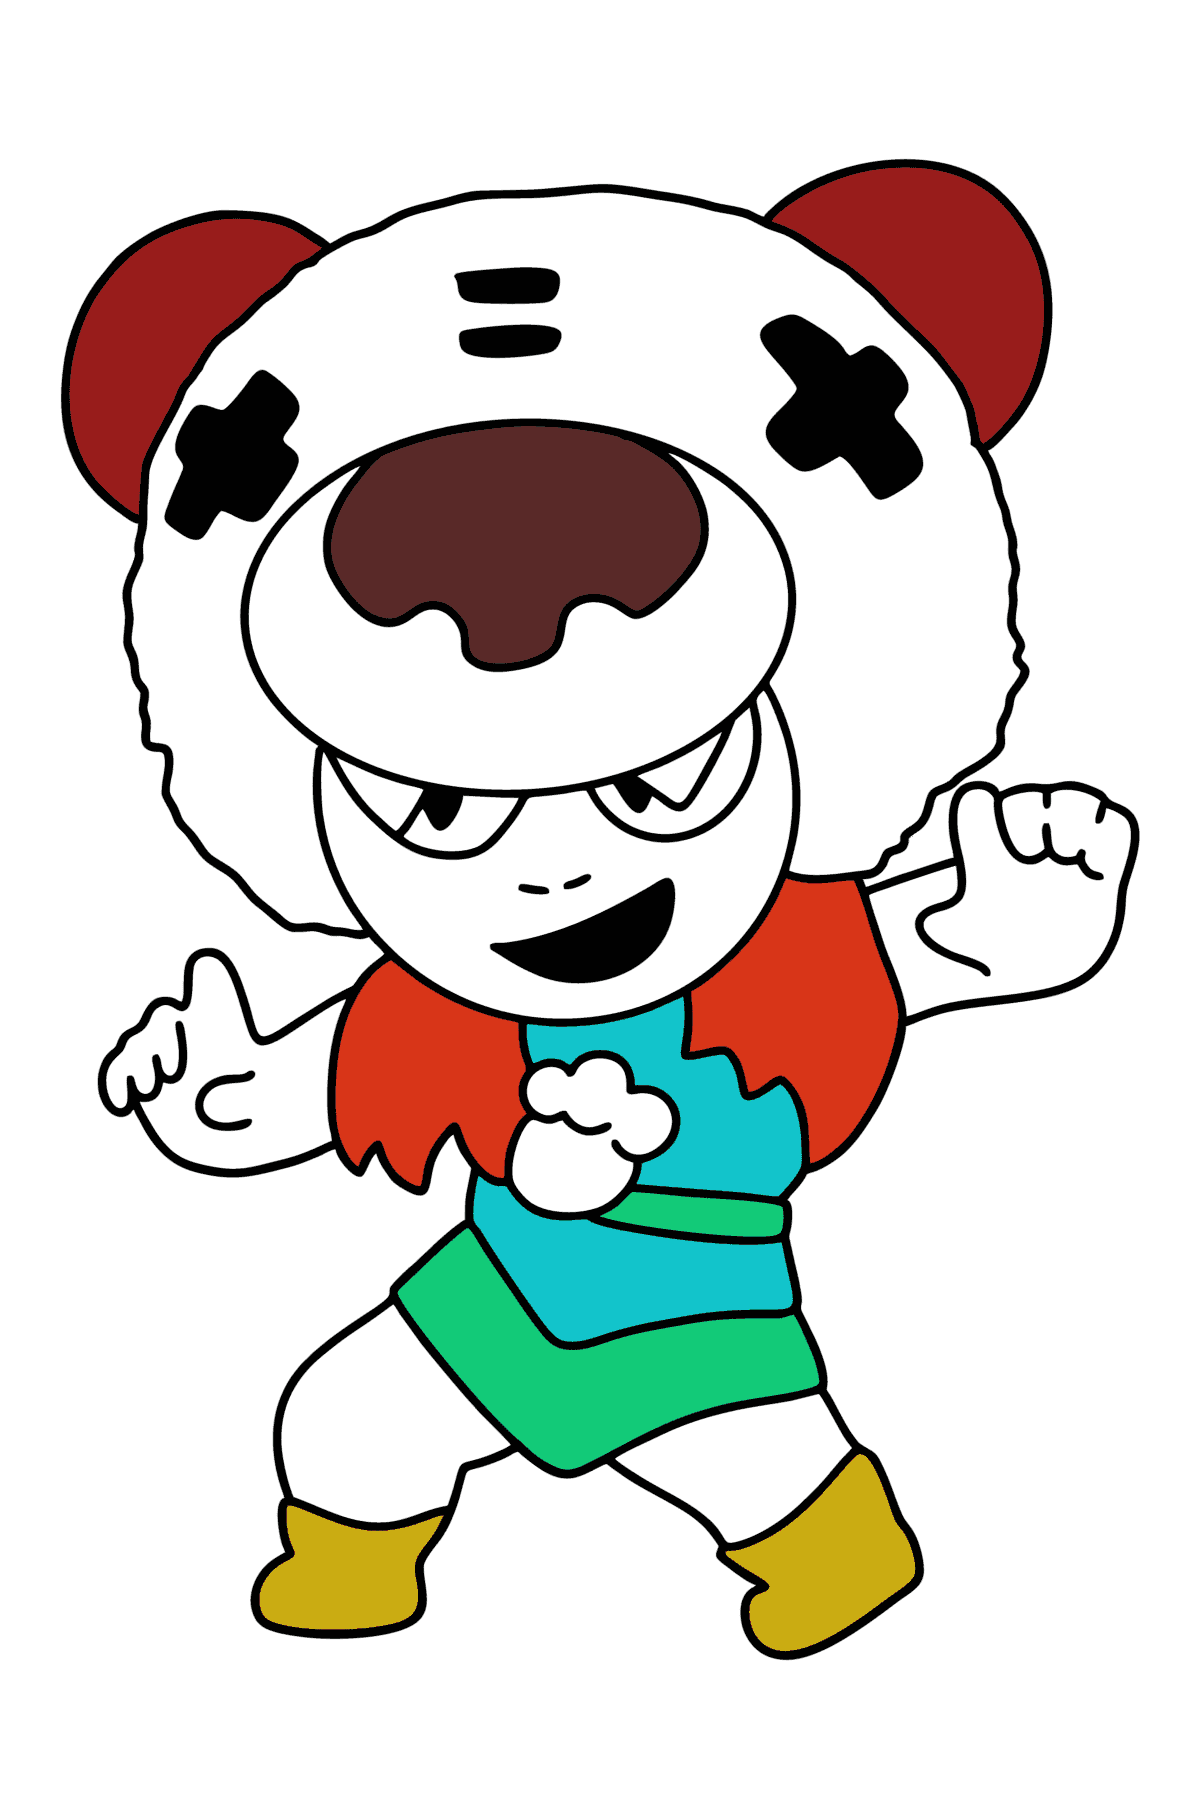 Brawl Stars Nita coloring page - Coloring Pages for Kids